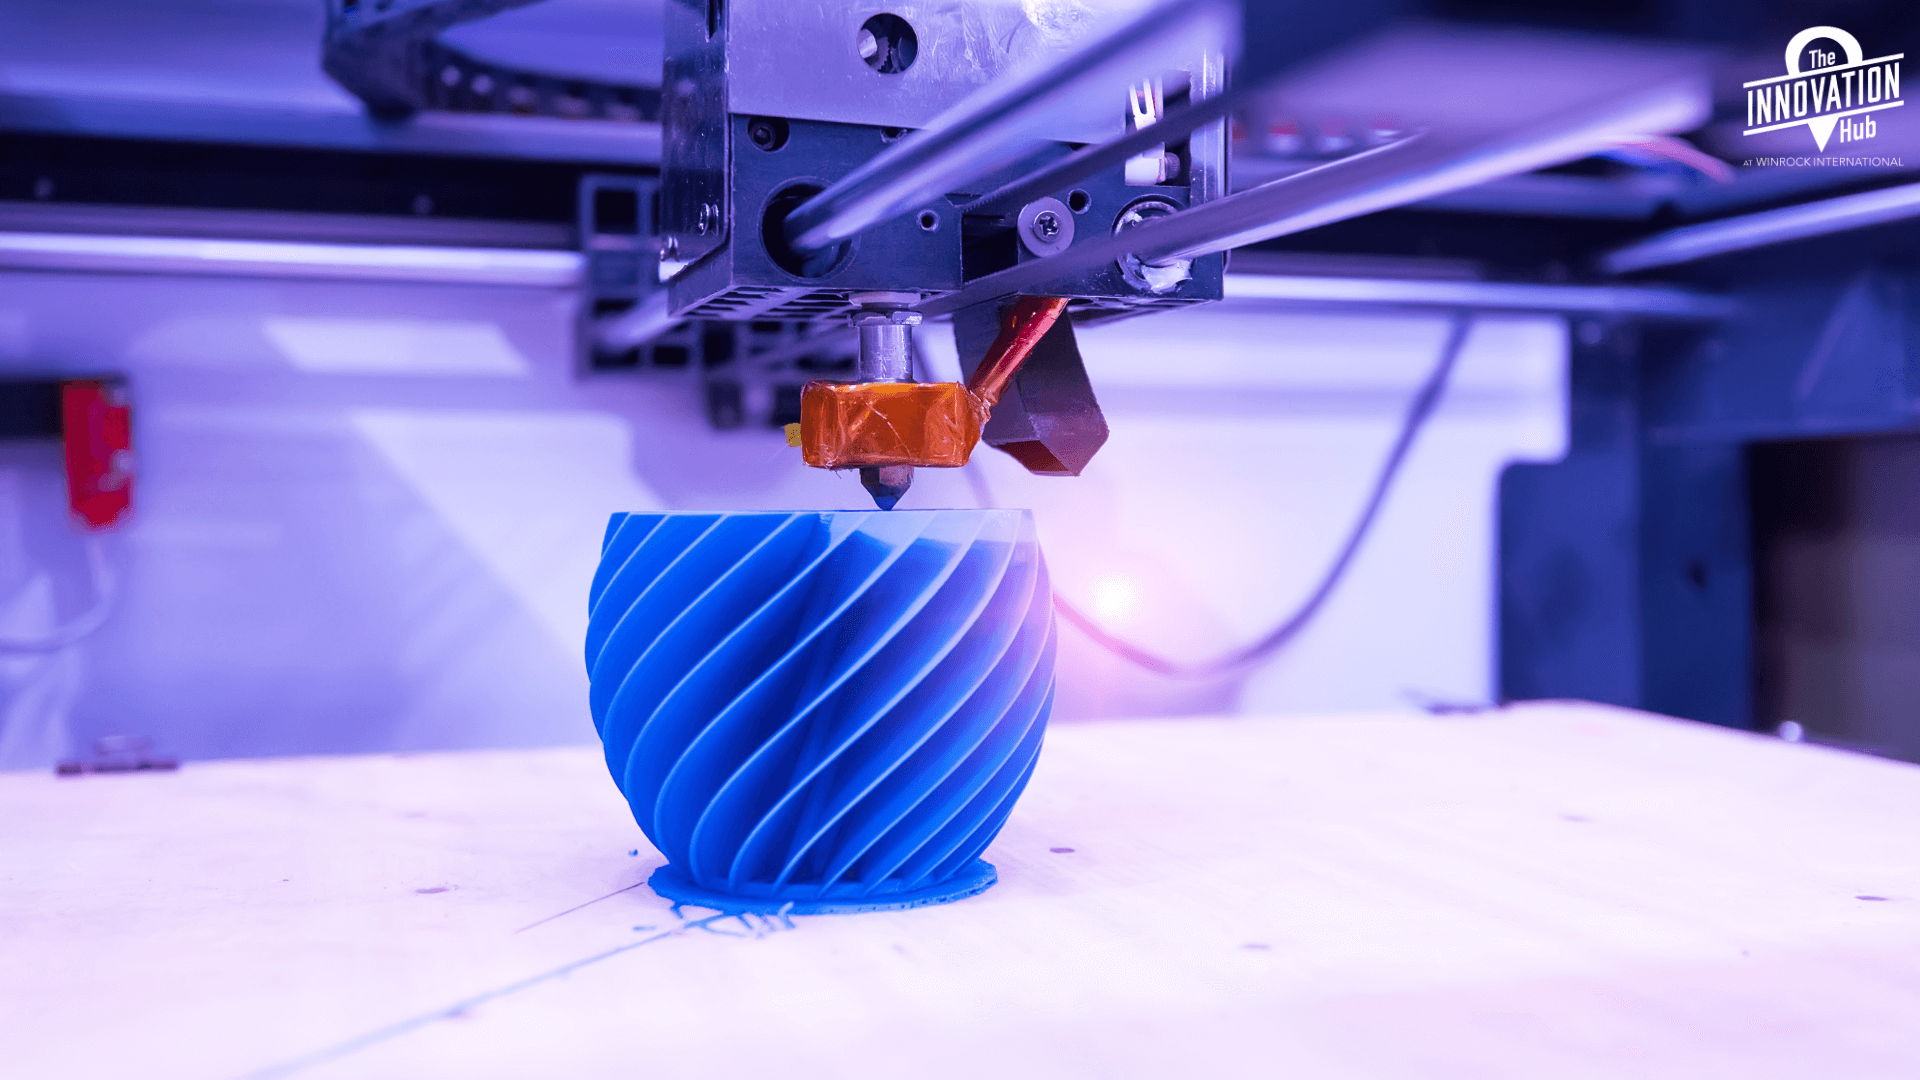 A swirly vase, being printed on a 3D printer